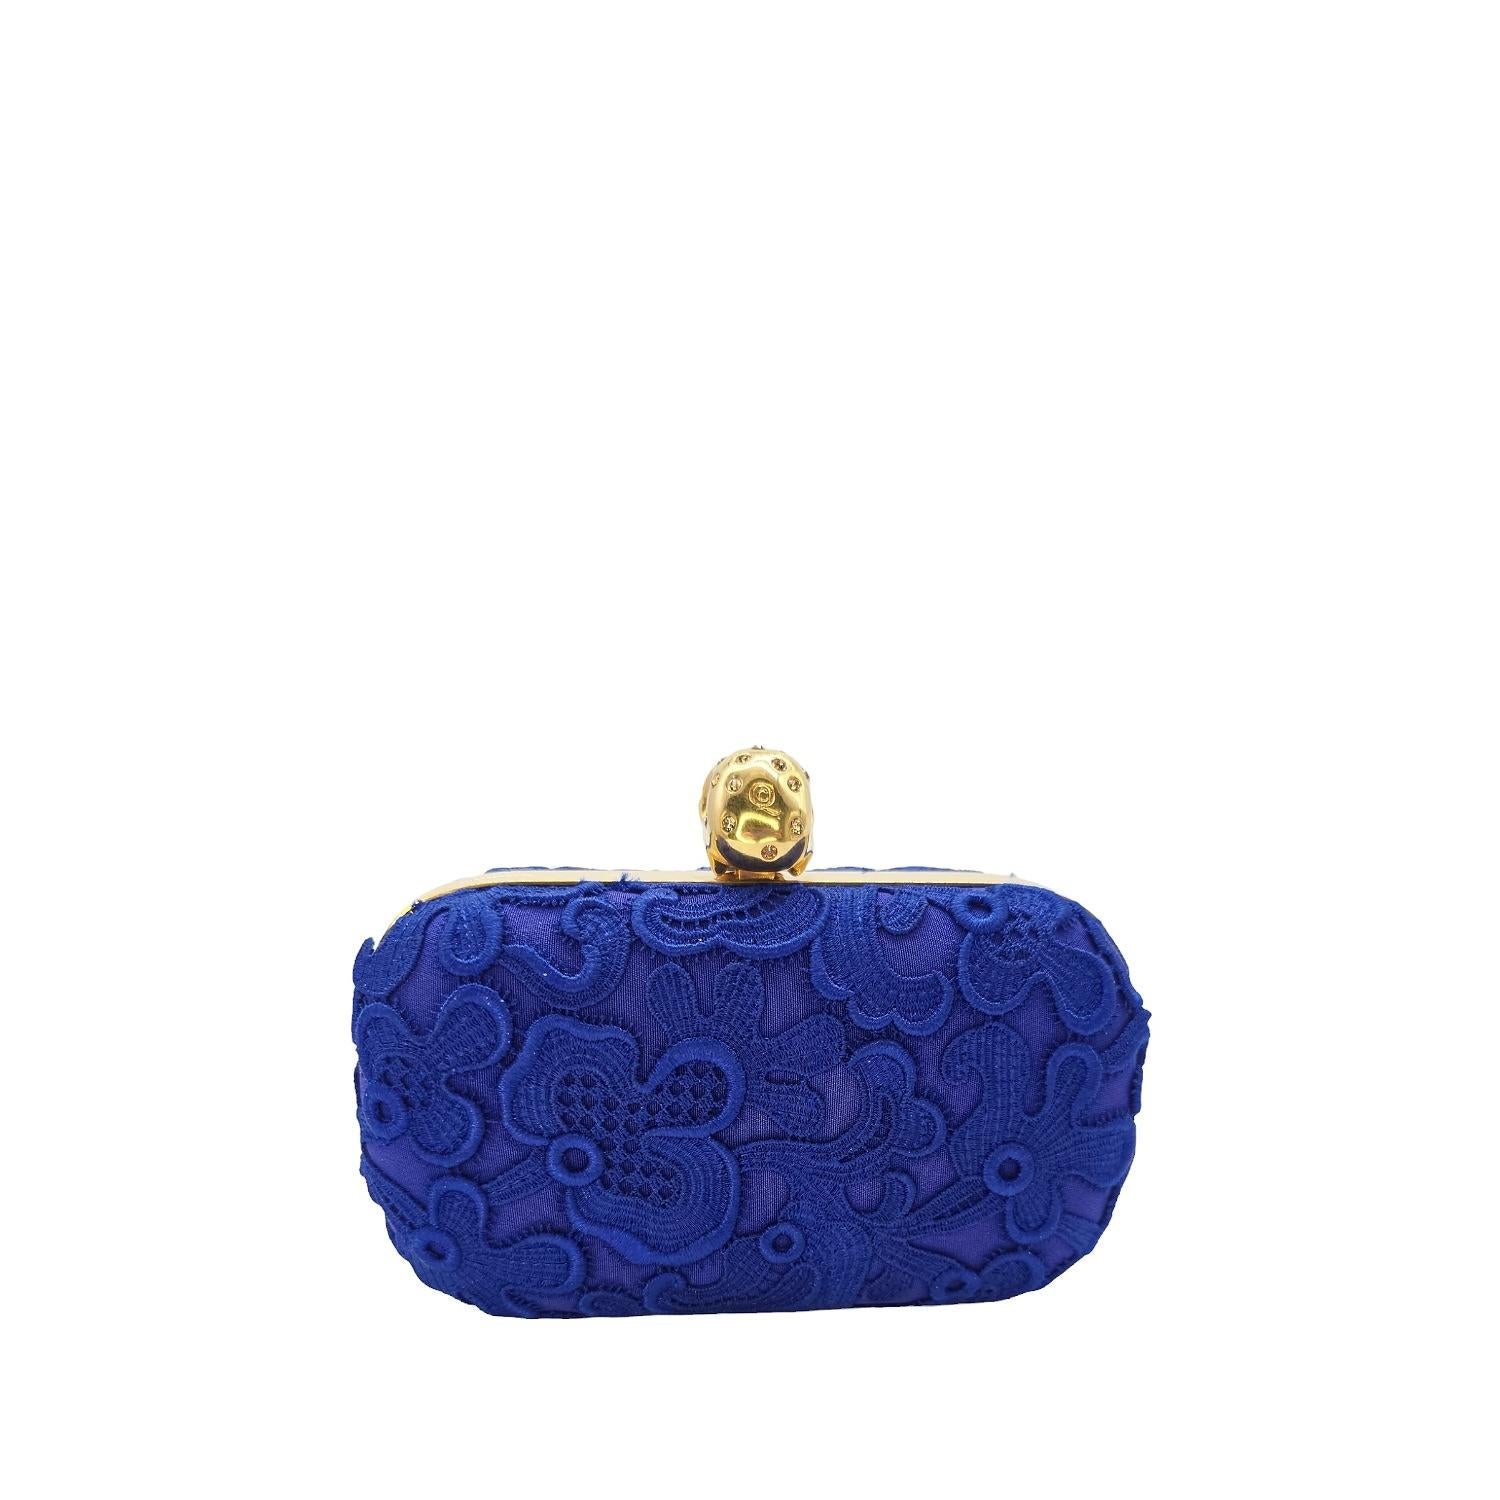 Exude elegance and sophistication with the Alexander McQueen Blue Lace Pochette Clutch. Crafted for bold fashionistas, this classic beauty features blue lace and a crystal-adorned skull toggle clasp. The spacious leather-lined interior holds just